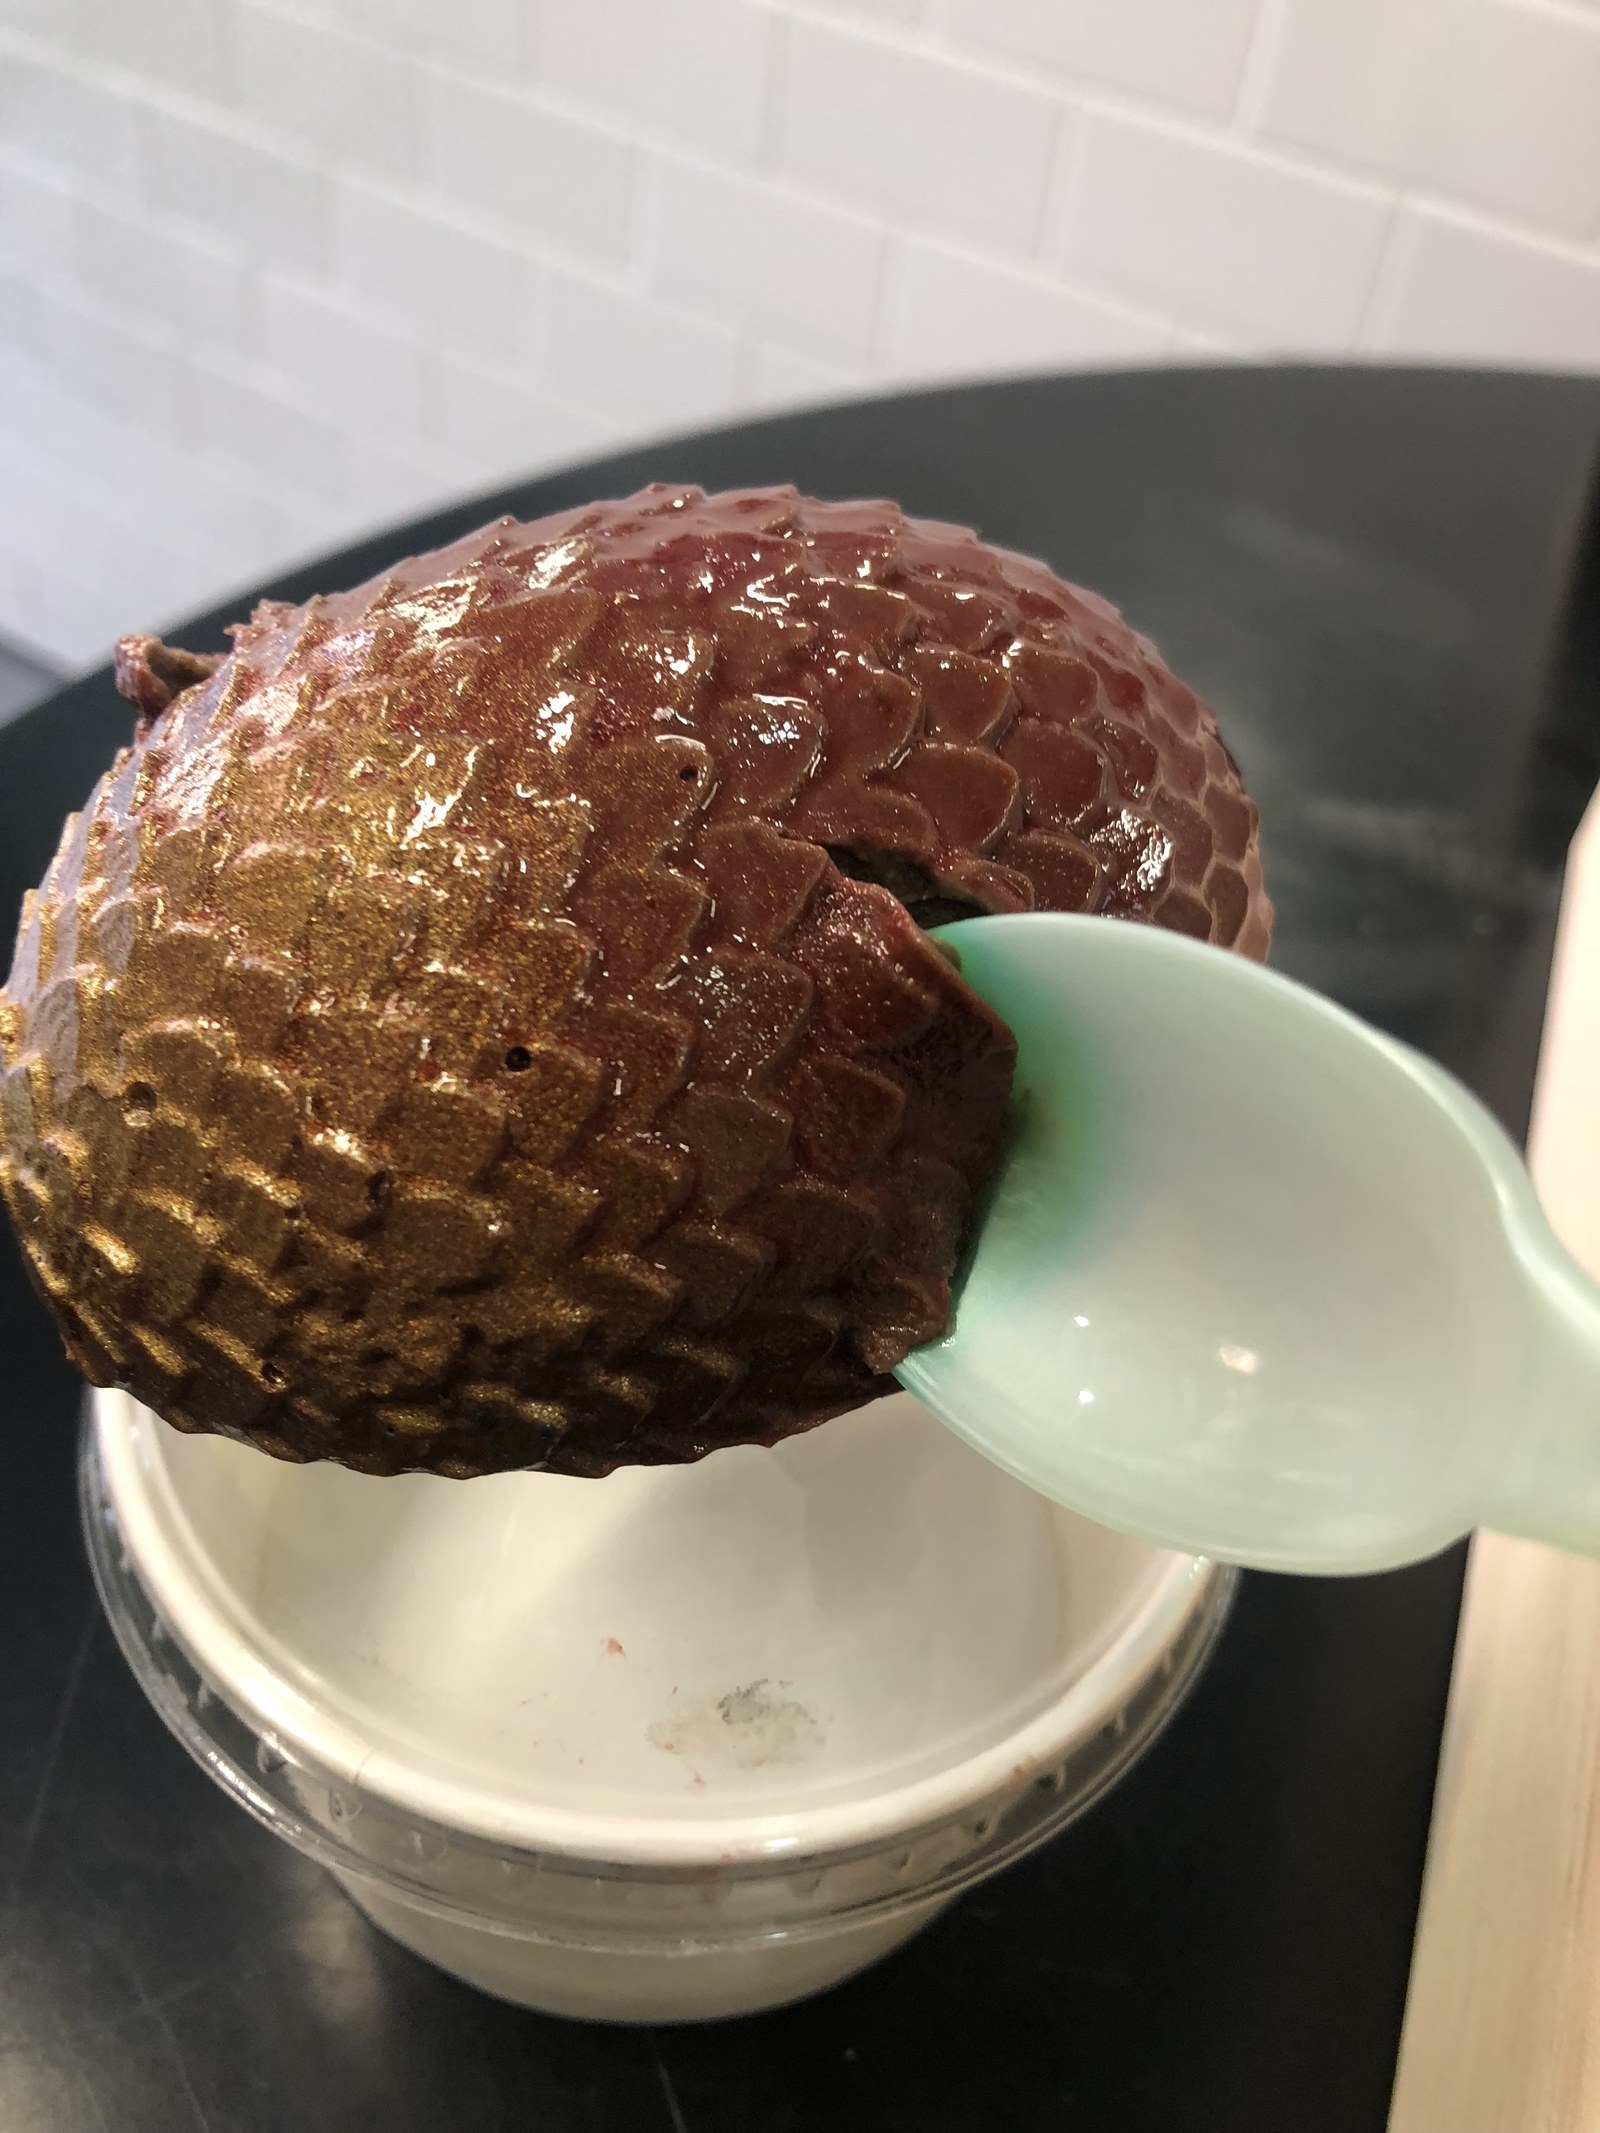 I Tried The Game Of Thrones Dragon Egg Ice Cream And Here S What I Thought